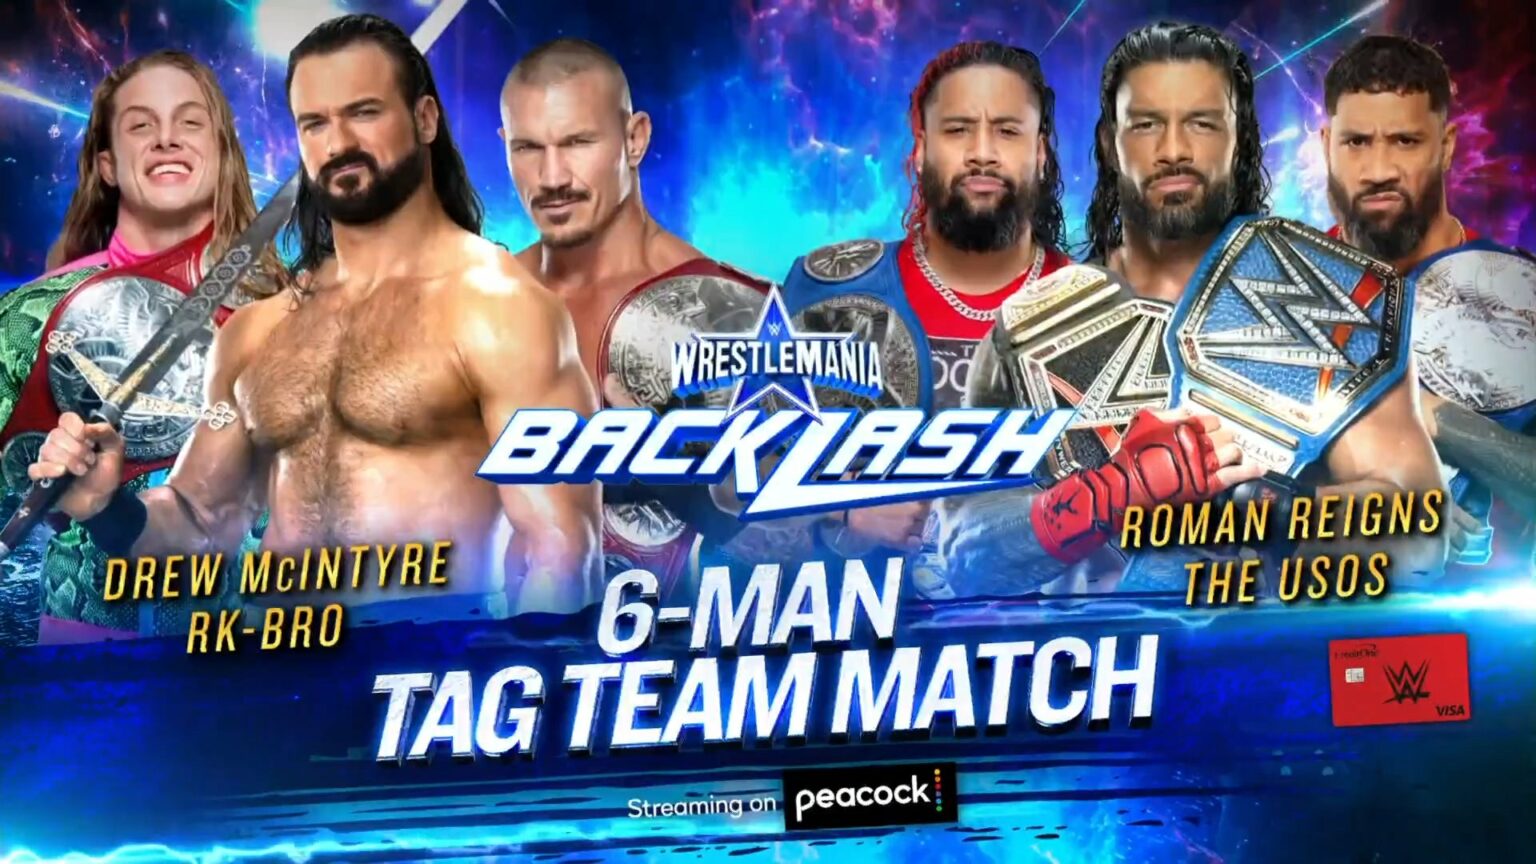 WWE WrestleMania Backlash start time and where to watch